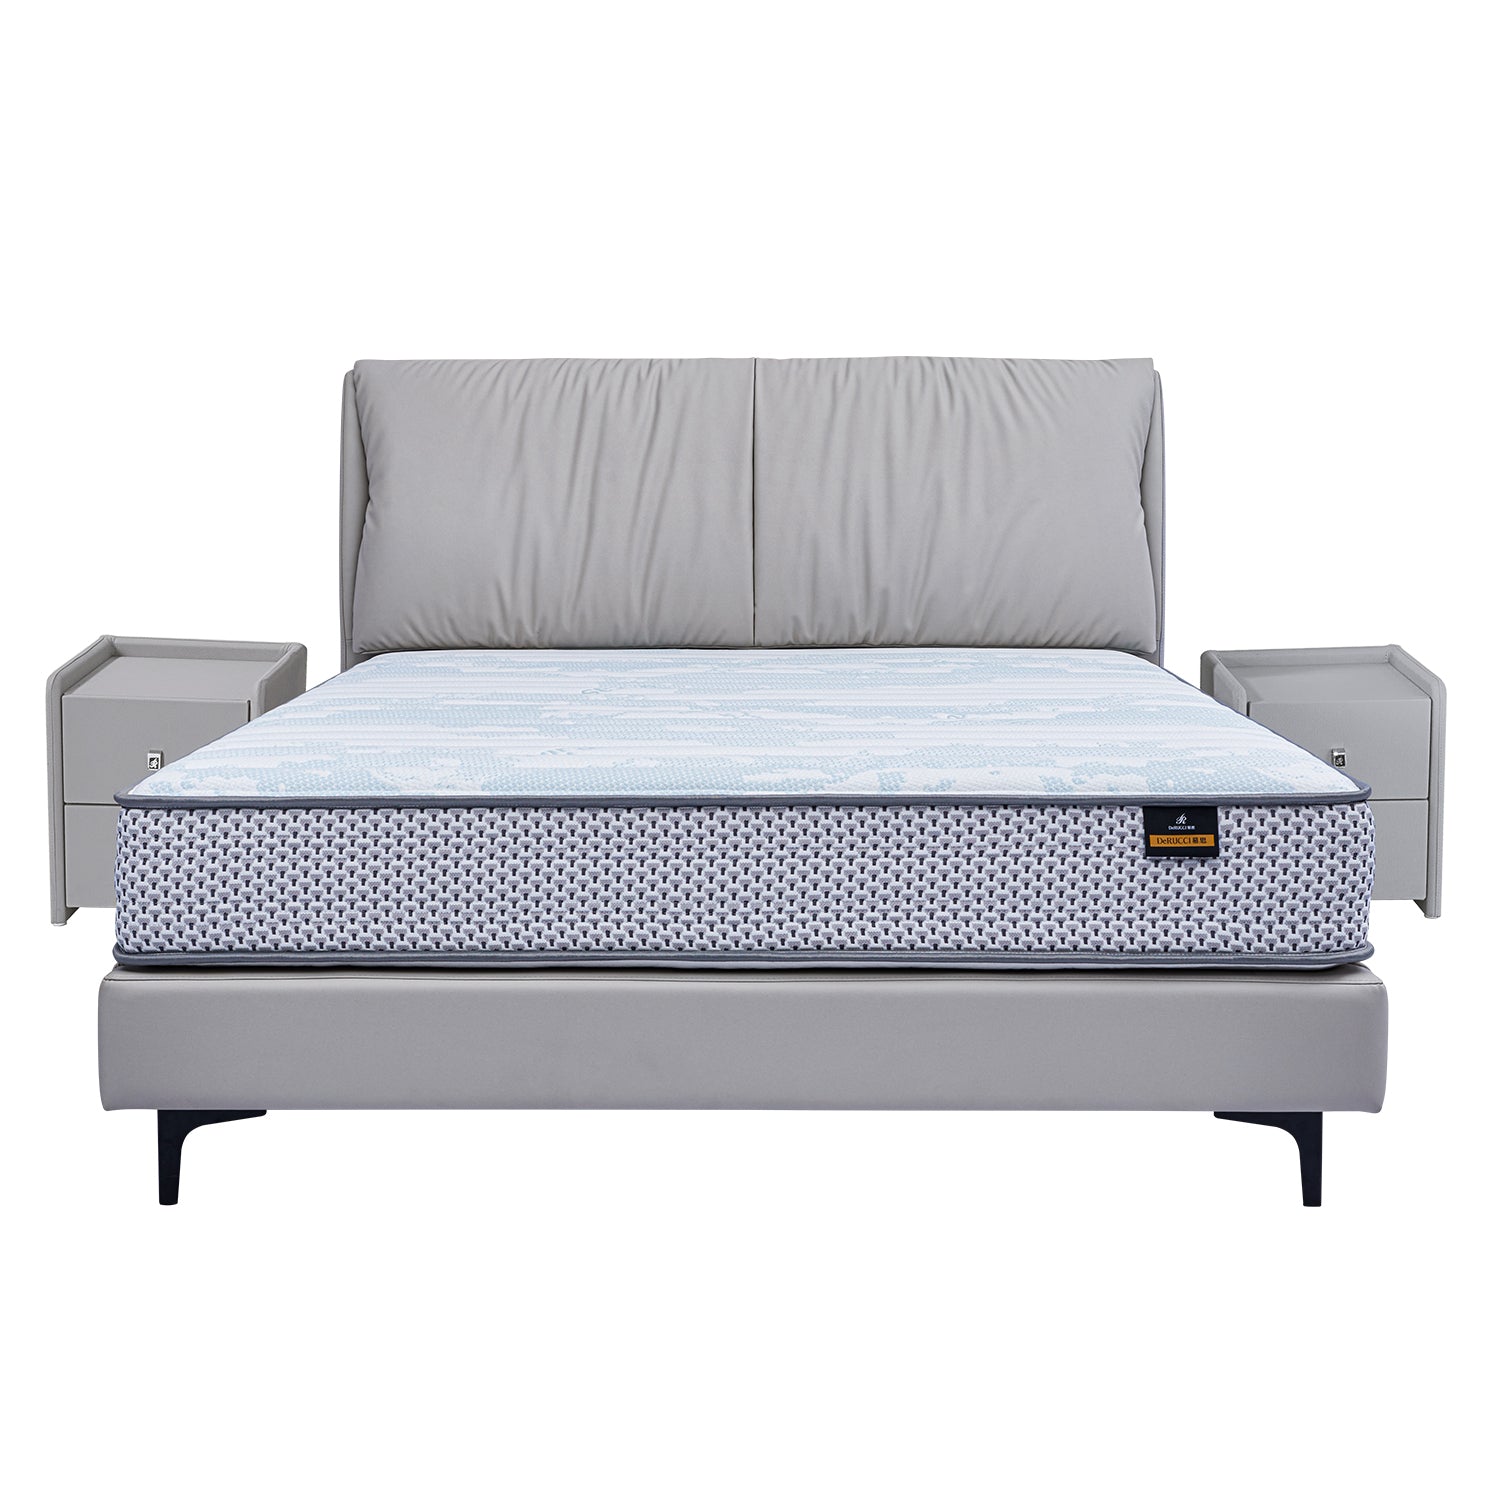 DeRUCCI grey bed frame BOC1-012 with upholstered headboard and patterned mattress, accompanied by matching grey bedside tables with drawers